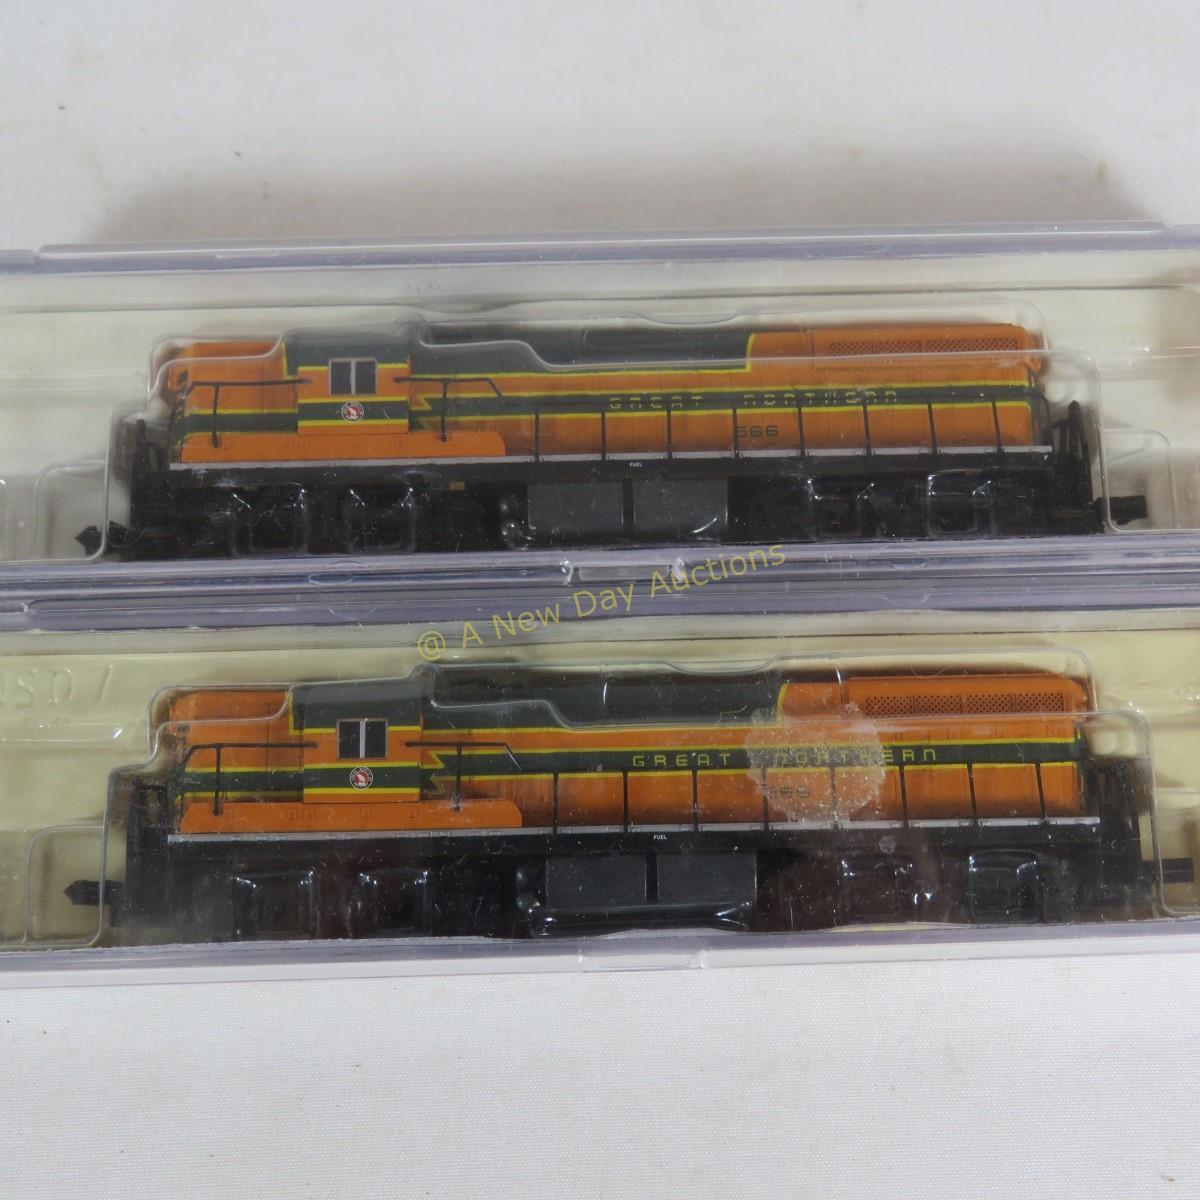 10 N Scale Train Cars with 2 Locomotives